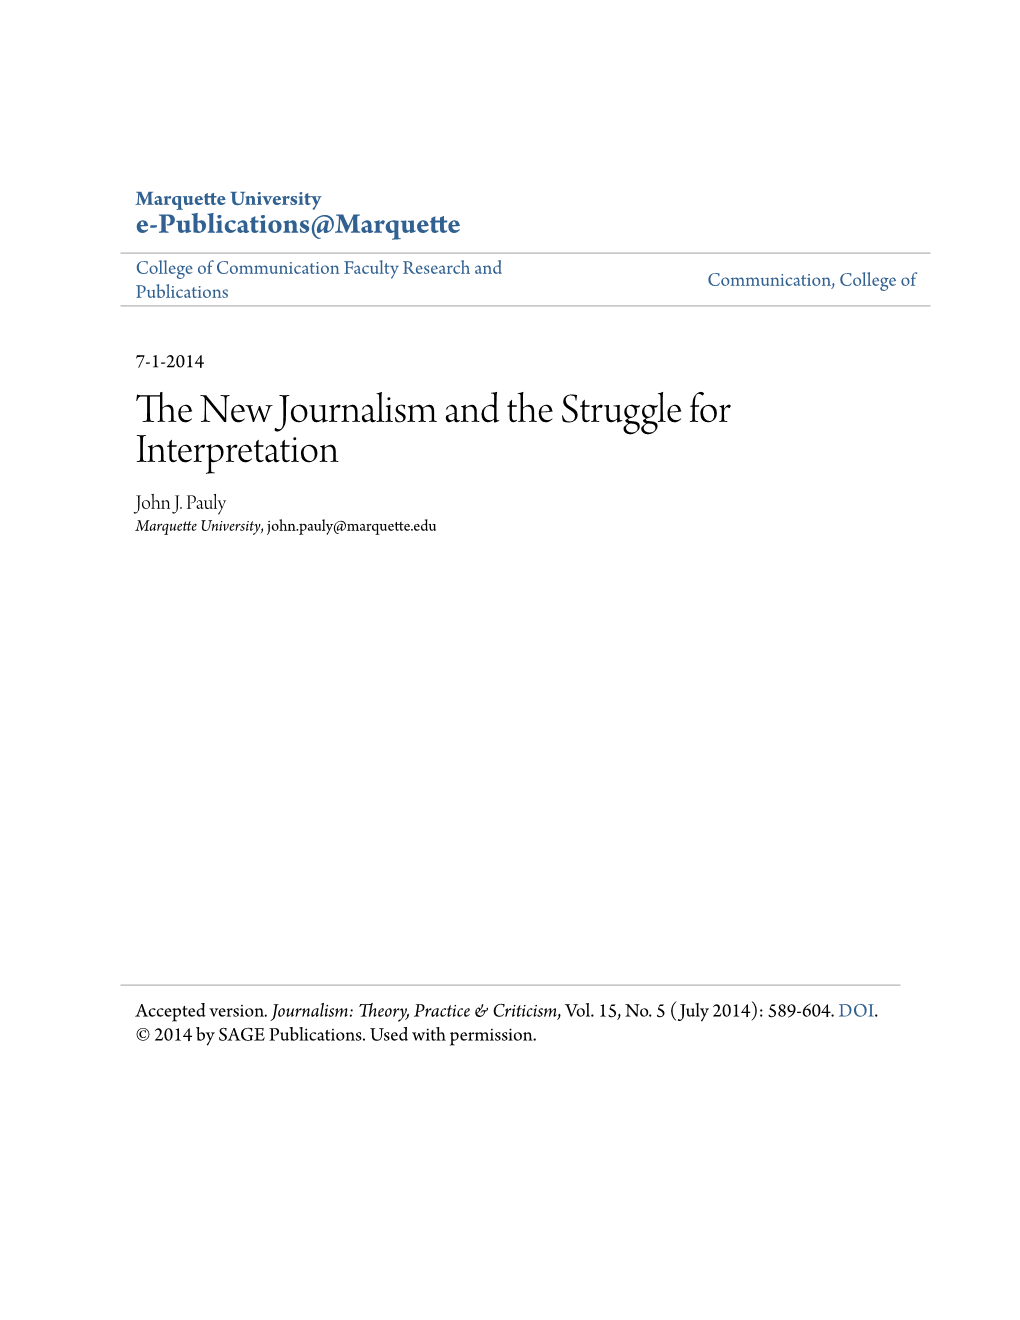 The New Journalism and the Struggle for Interpretation